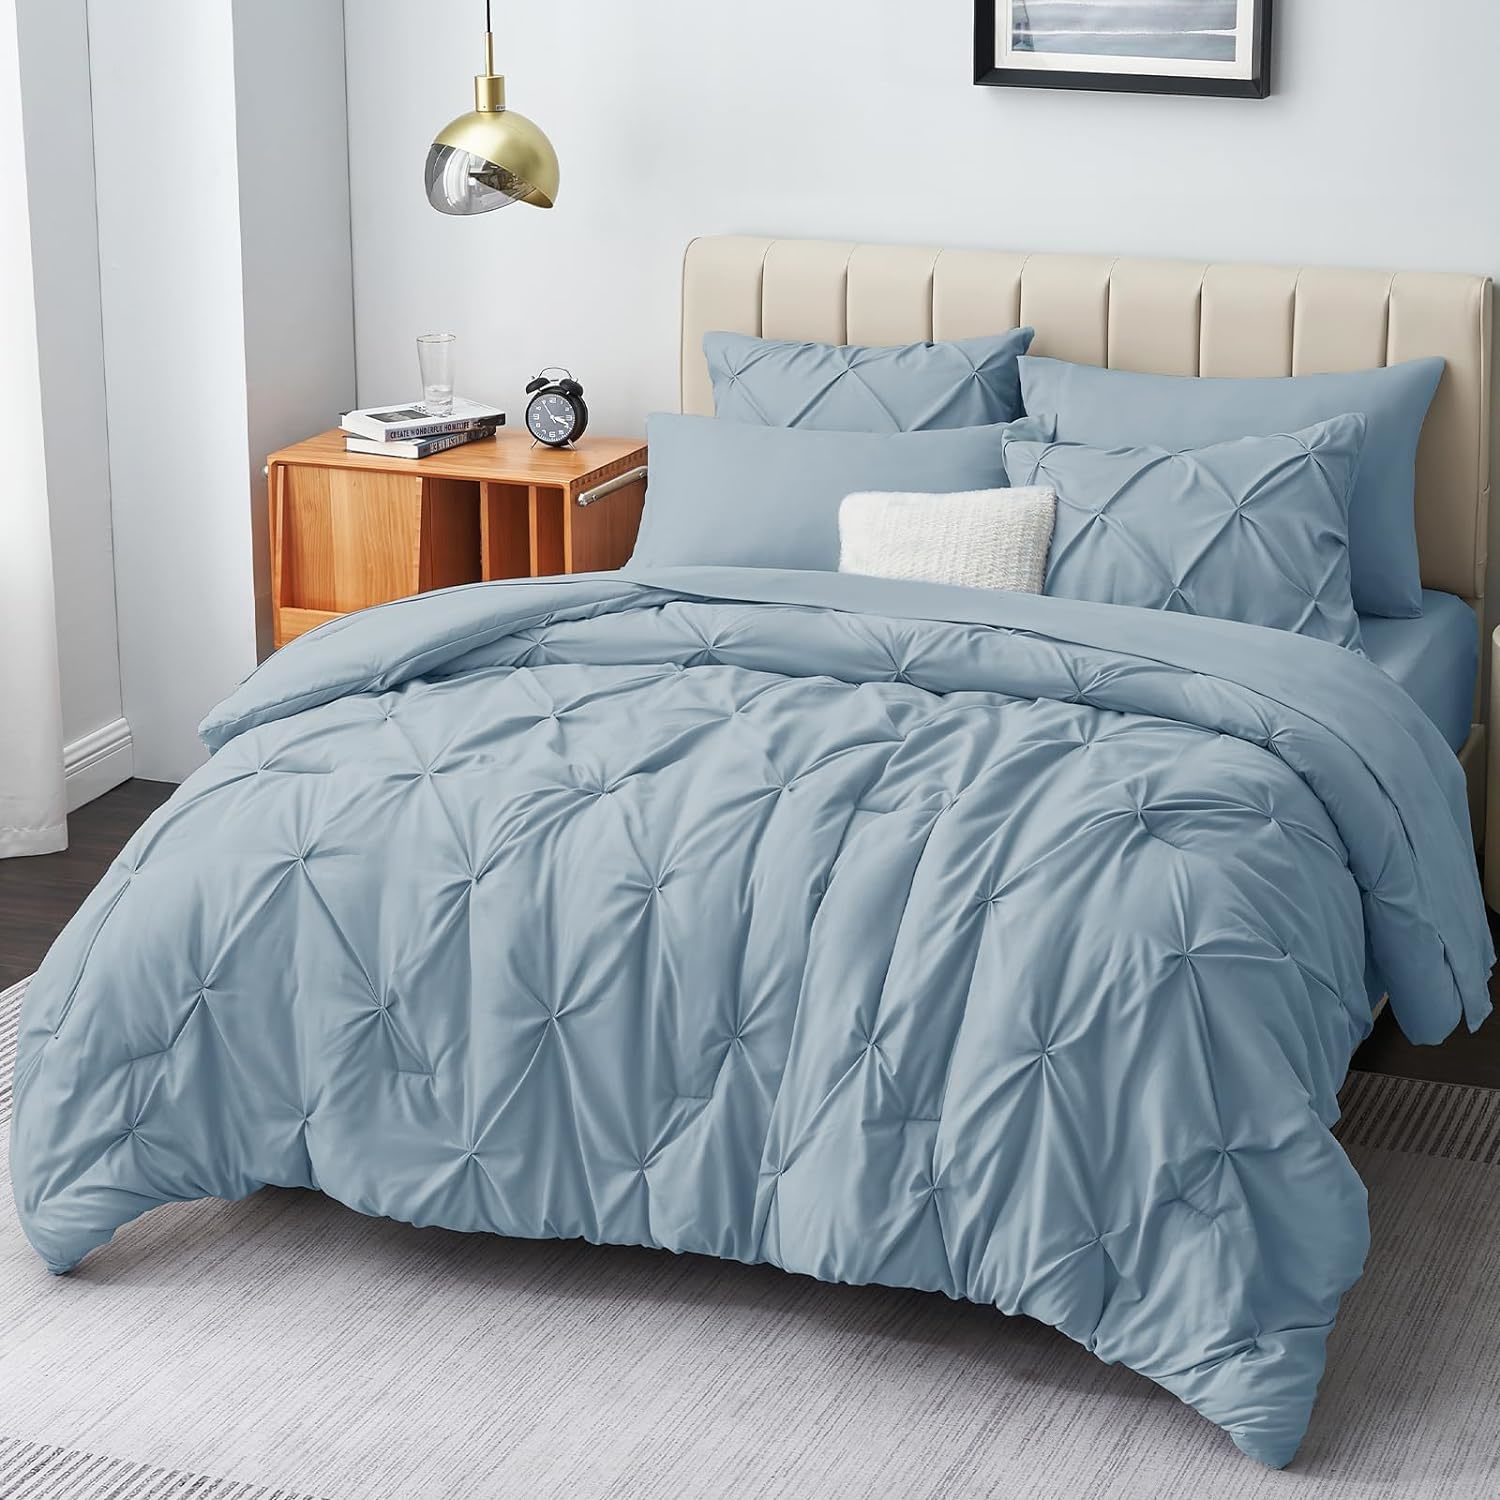 Full Size Comforter Sets - 7 Pieces Comforters Full Size Light Blue, Grey Pintuc - $84.99